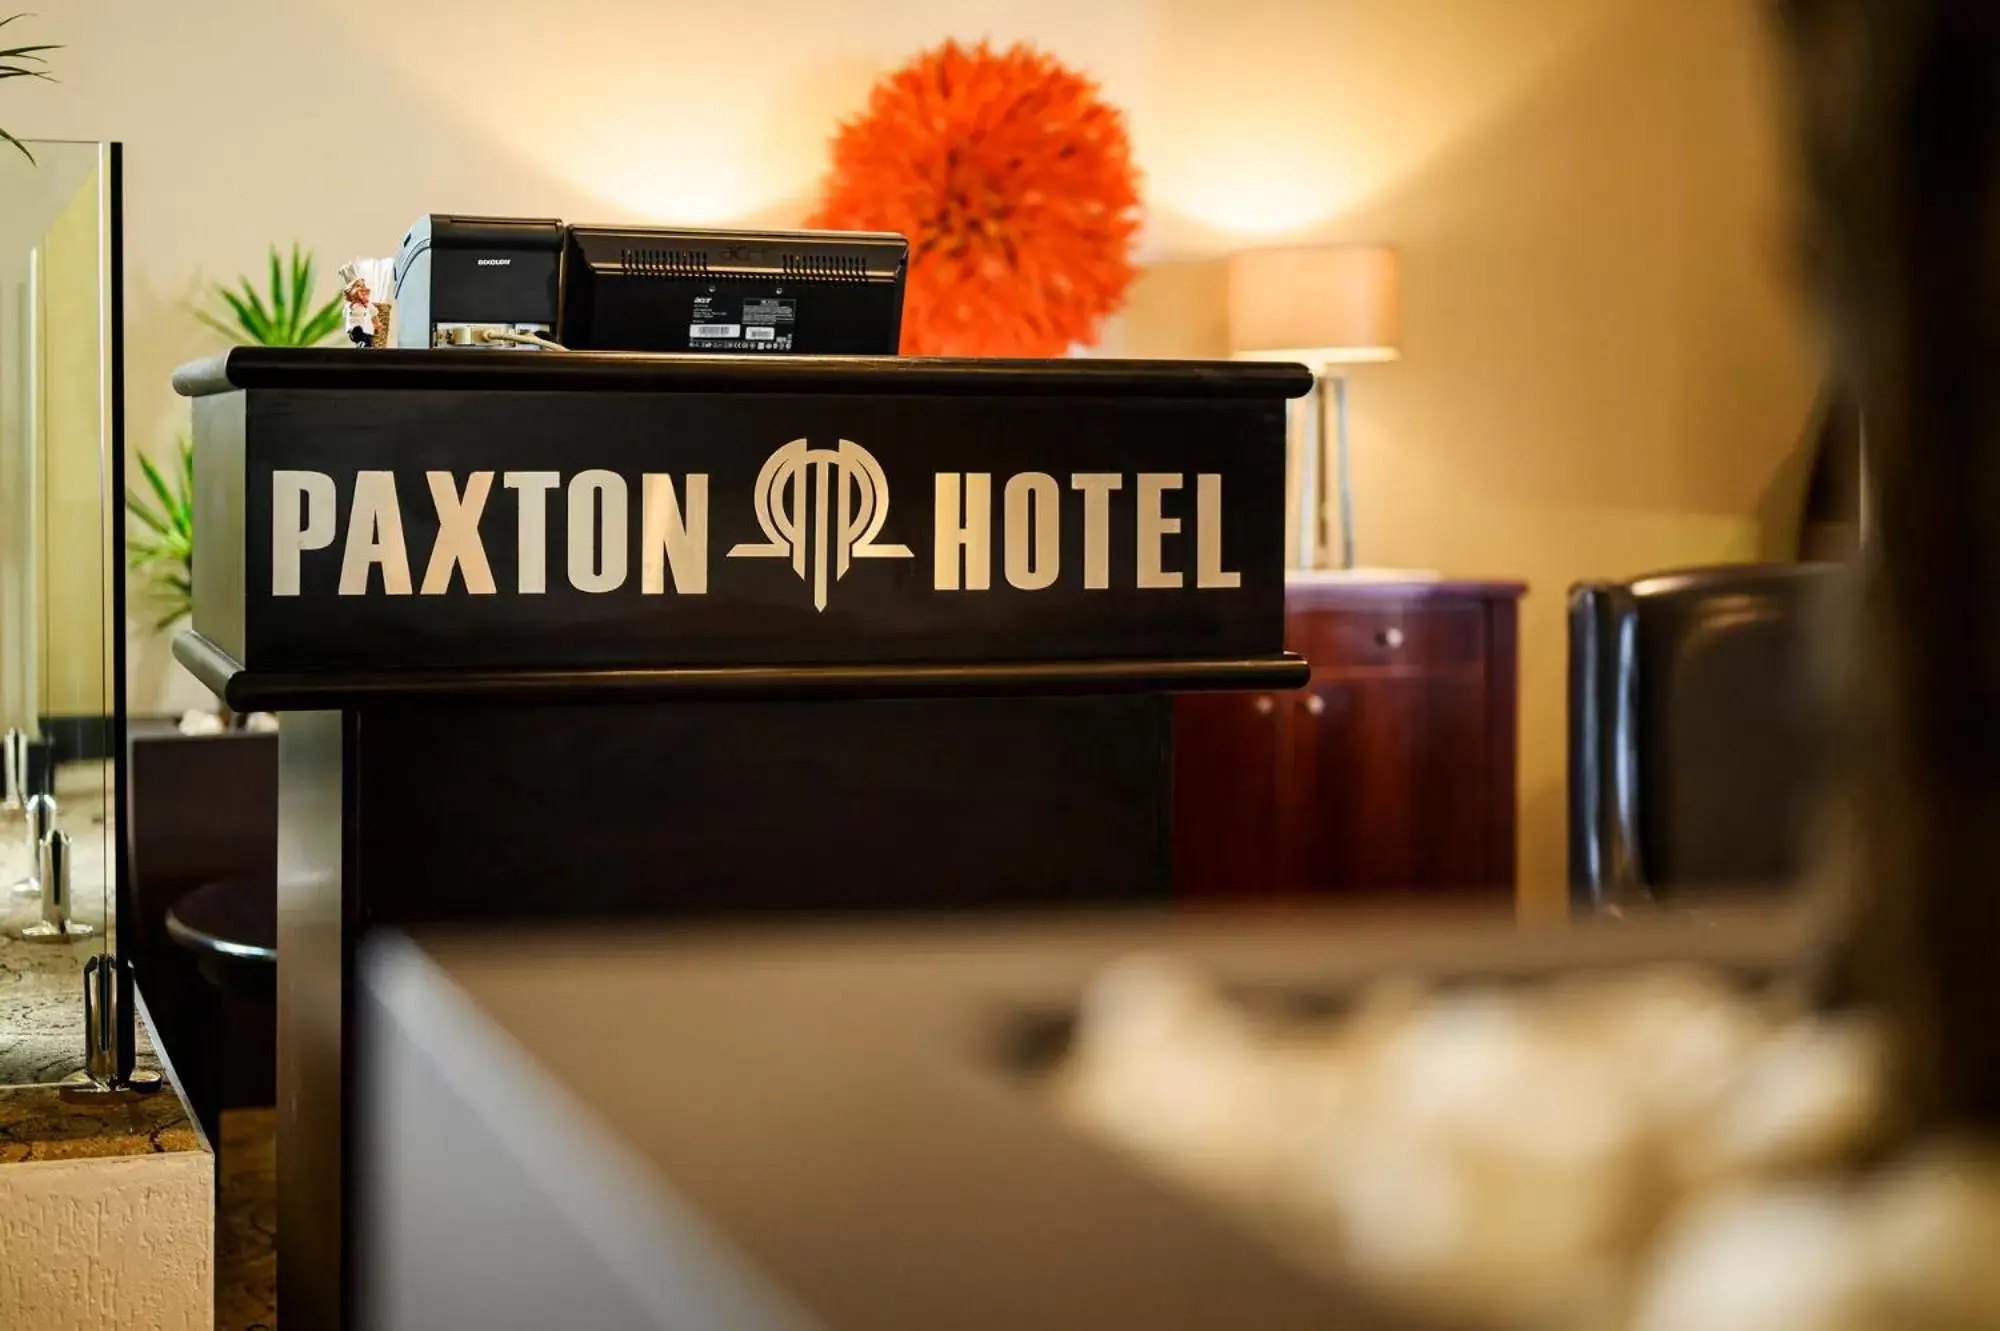 Property logo or sign in Paxton Hotel